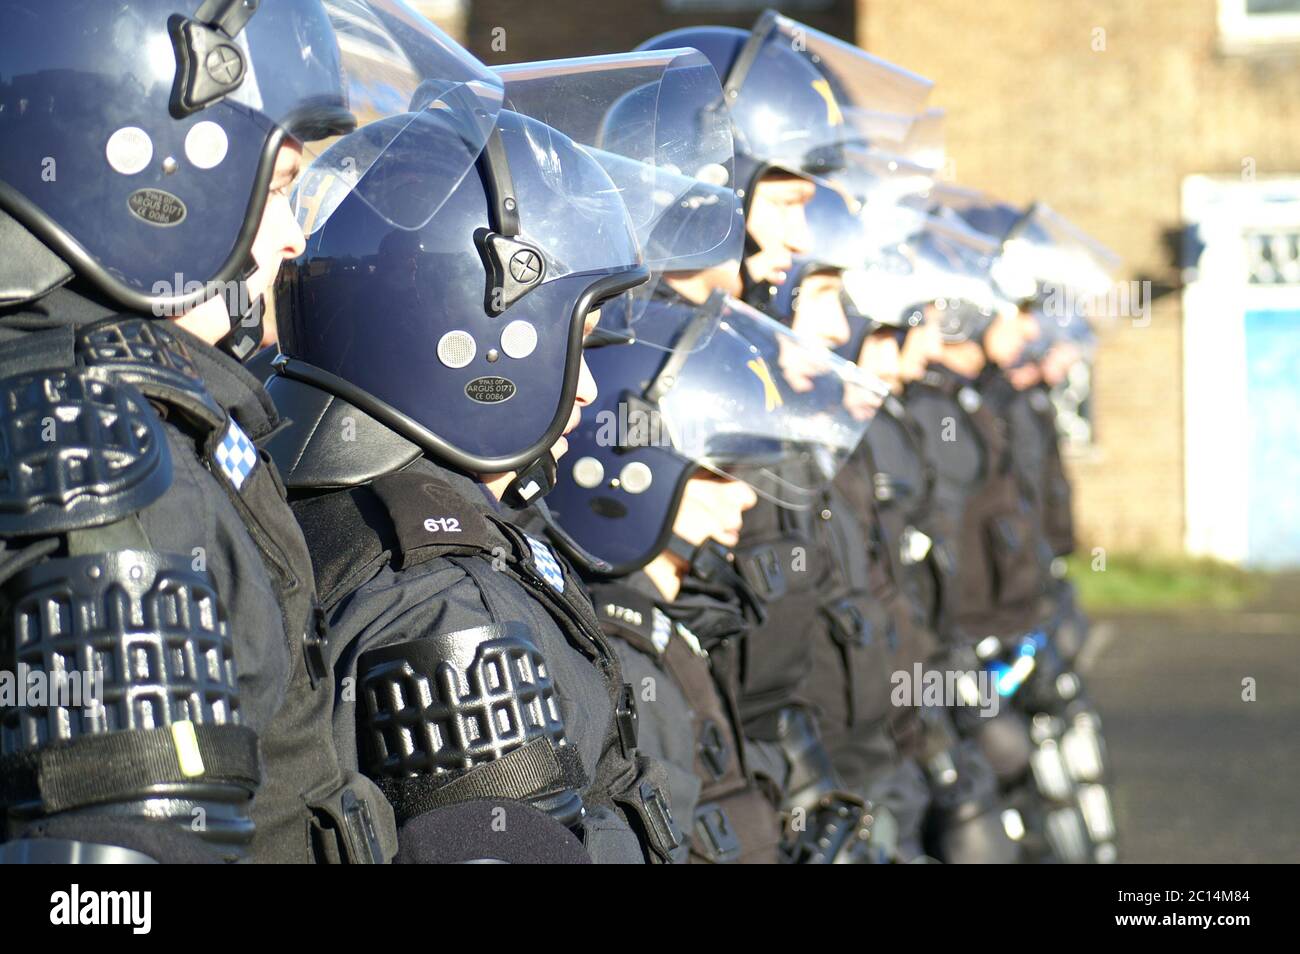 policing public protest Stock Photo